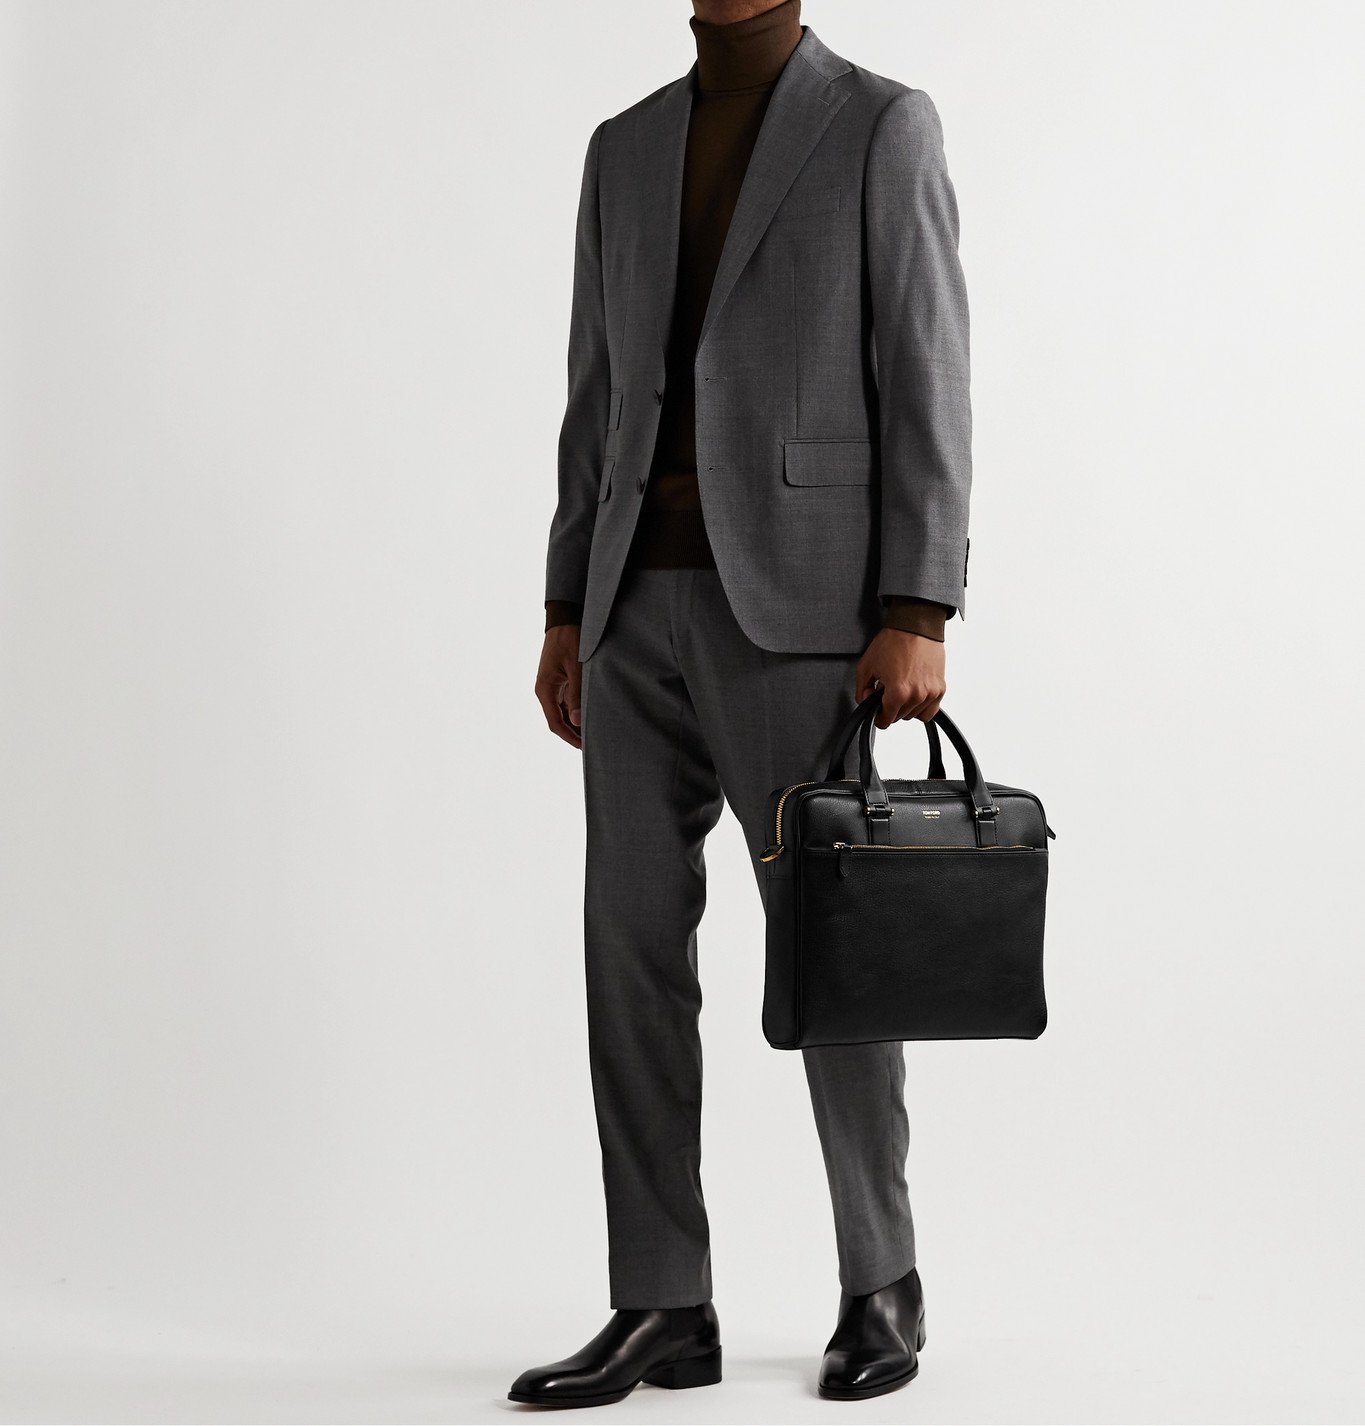 TOM FORD - Full-Grain Leather Briefcase - Black TOM FORD